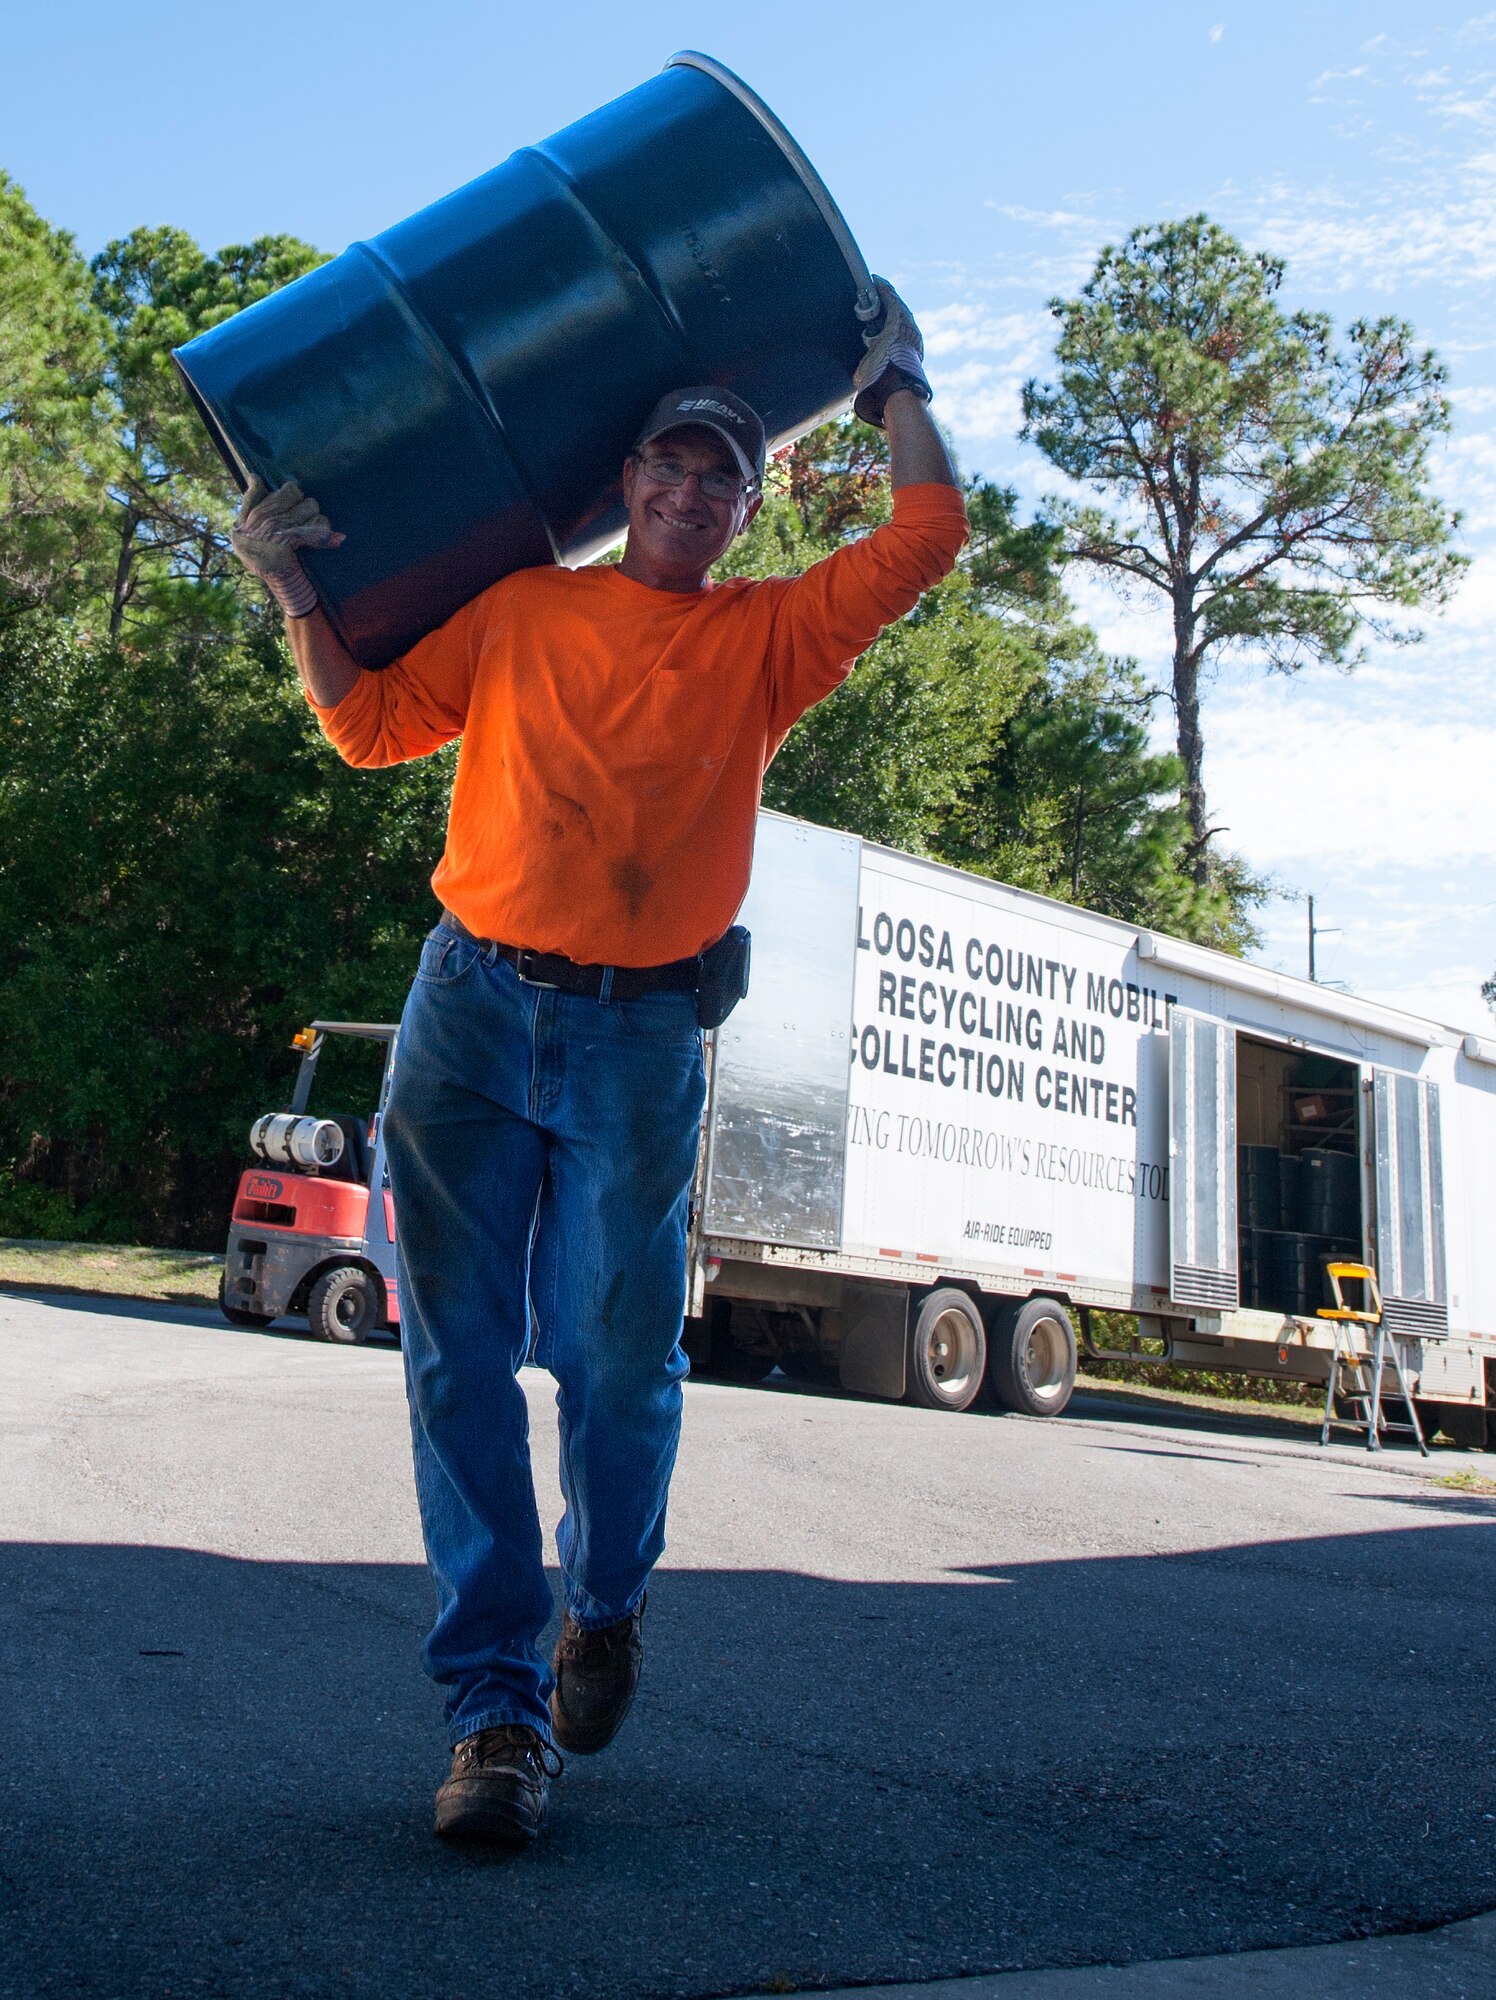 Darryl Roper, Okaloosa County Hazardous Waste recycling foreman, carries a 50-gallon drum during a Household Hazardous Waste Collection Day at Hurlburt Field, Fla., Oct. 24, 2014. The drums were used to collect items such as batteries, oil and paint. (U.S. Air Force photo/Senior Airman Kentavist P. Brackin)